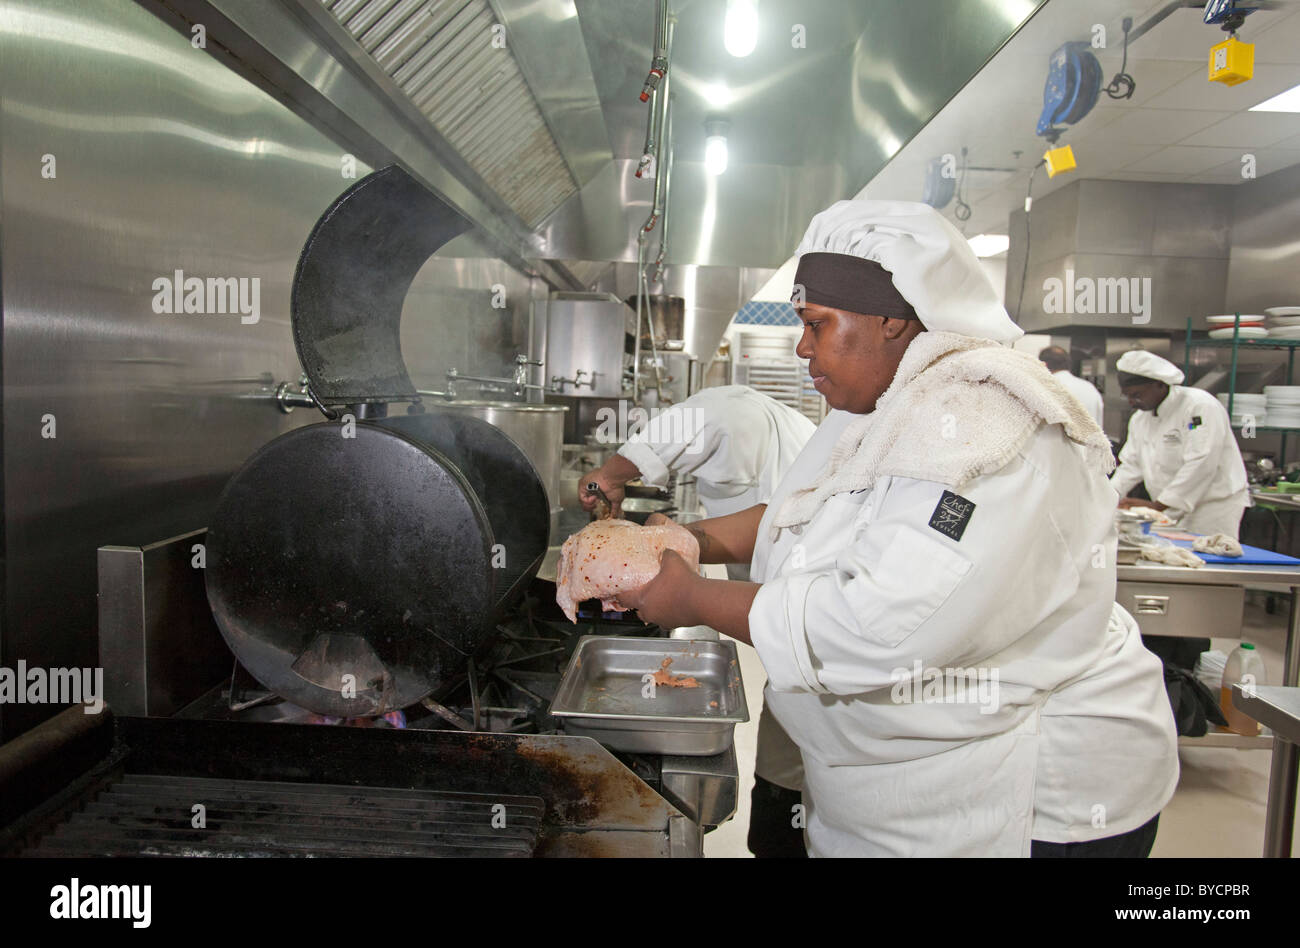 Roseville, Michigan - A student prepares food at the Dorsey Culinary Academy, a private career training school. Stock Photo